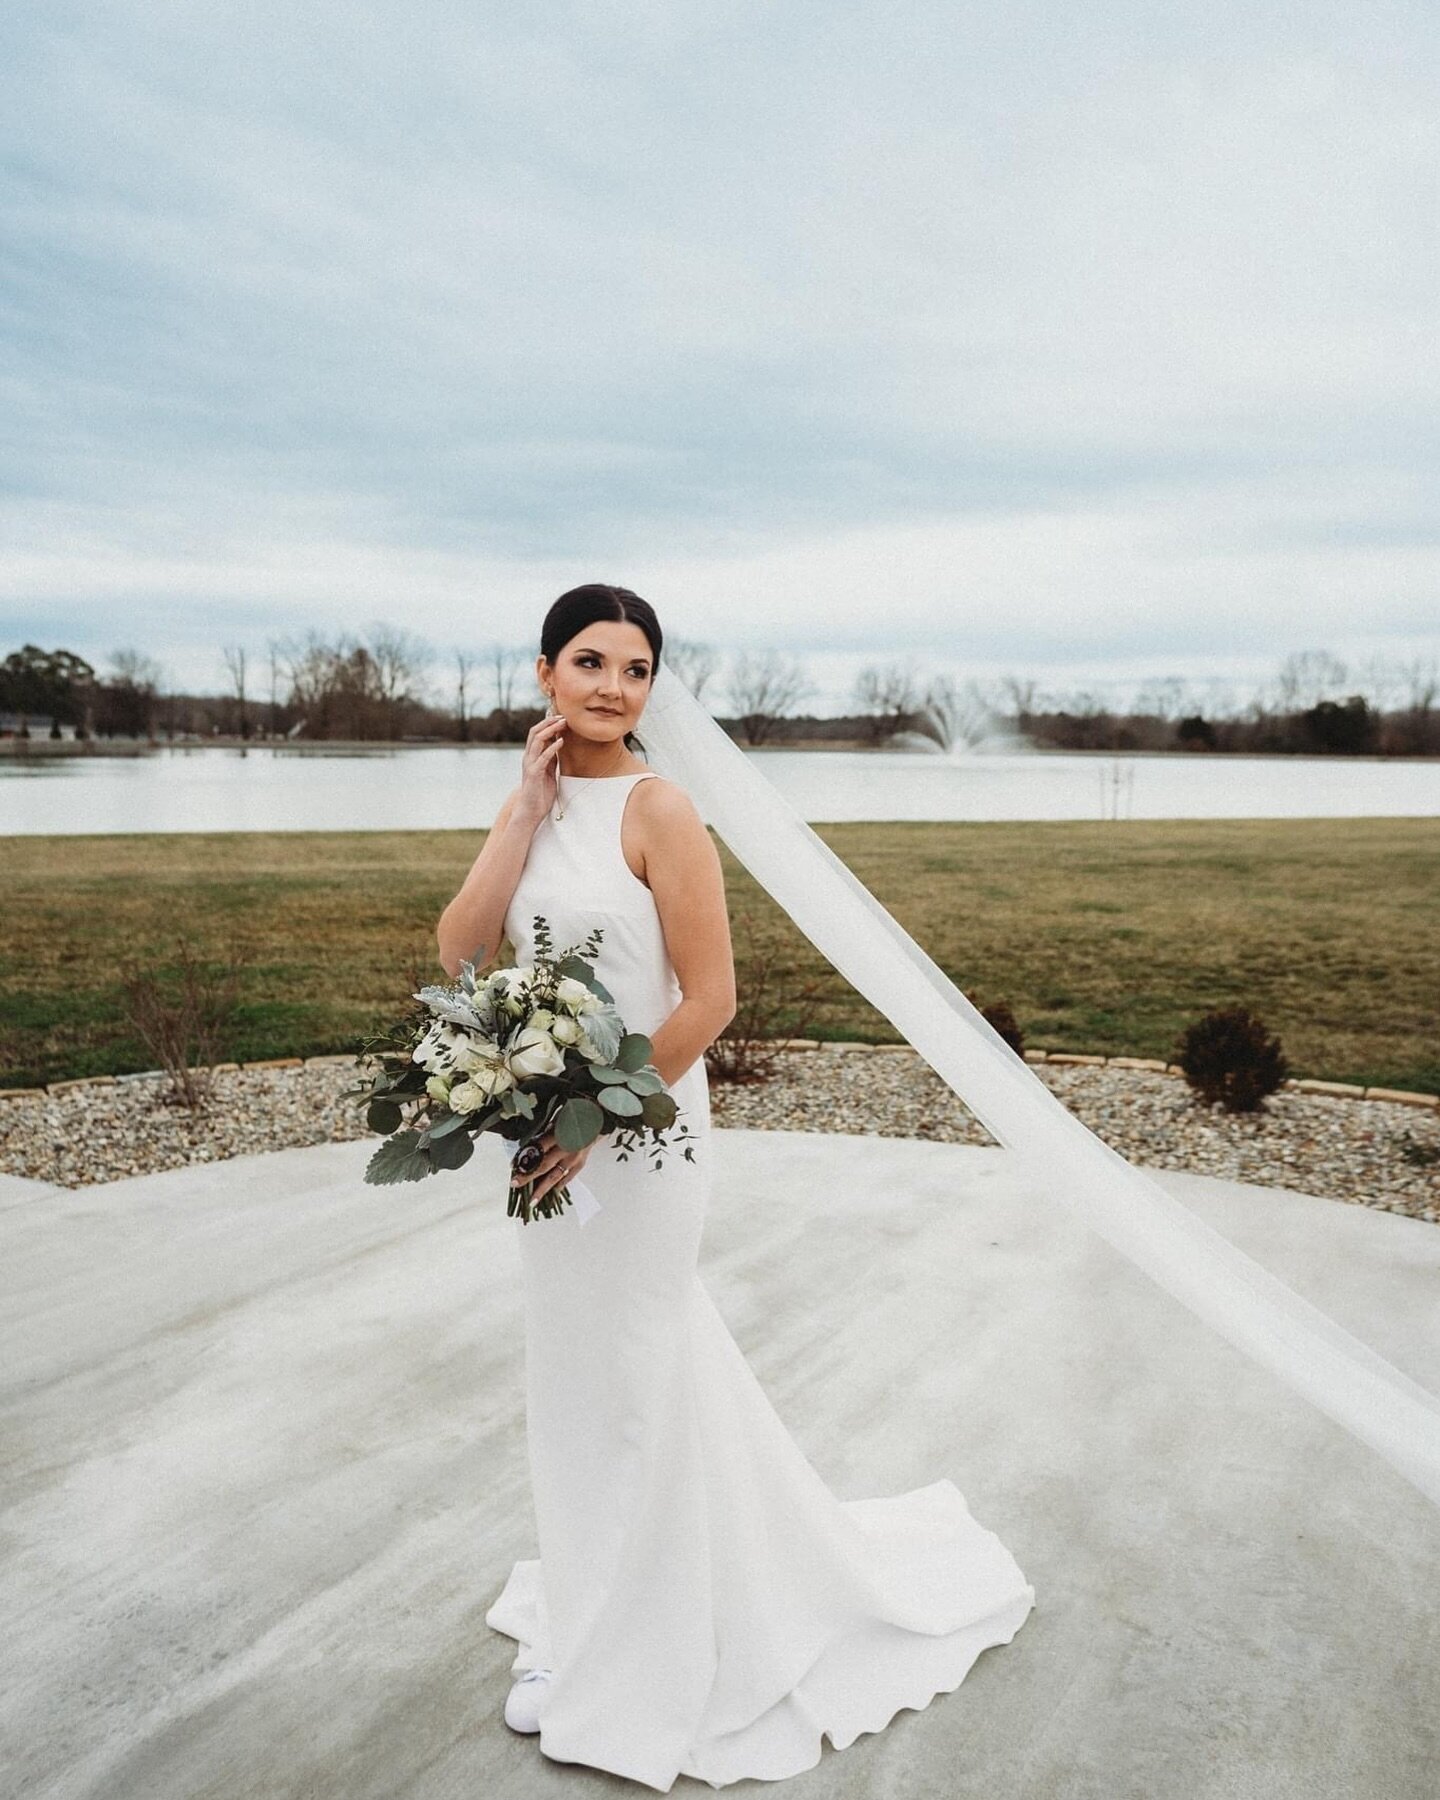 There&rsquo;s no such thing as the Monday blues when your bridal look is this dang good. Gah! We will be swooning over these sneak peeks for a looooooong time!!!😍

Bride: @jennarae2011 
Photography: @kendrahaysphotography 
Venue: @yateseventcenter 
